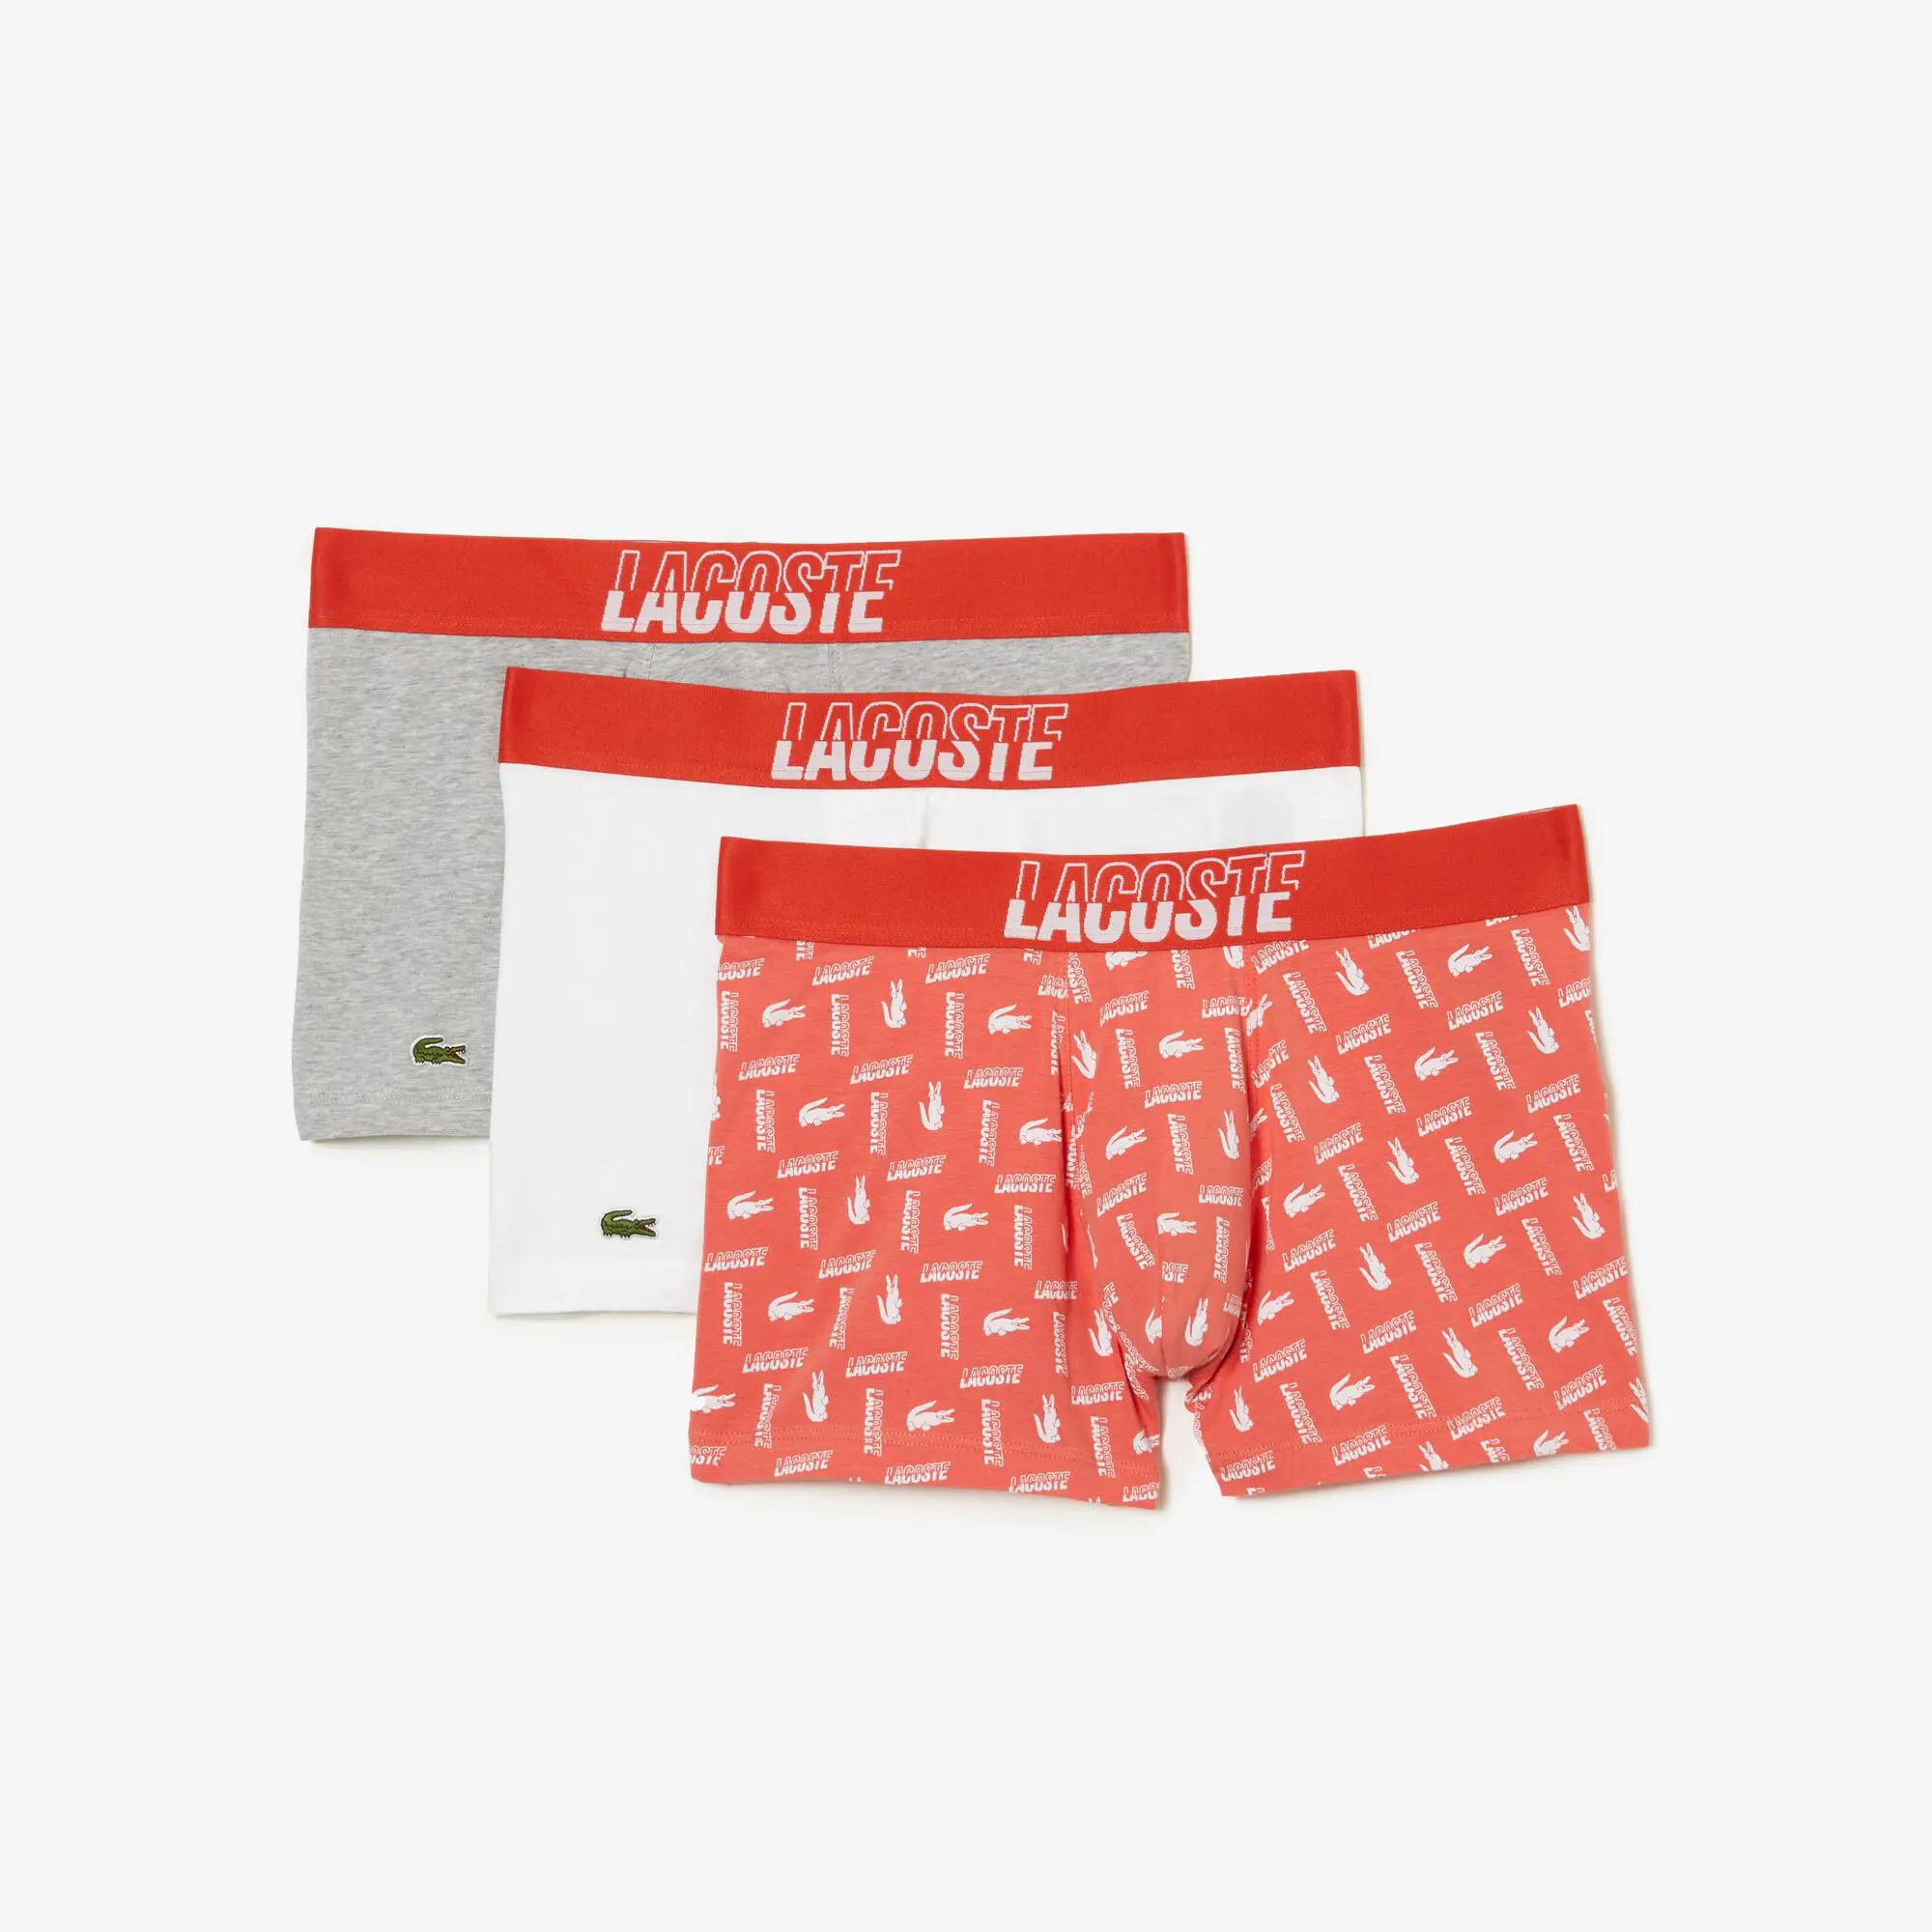 Lacoste Men’s 3-Pack Lacoste Stretch Cotton Printed Trunks. 2